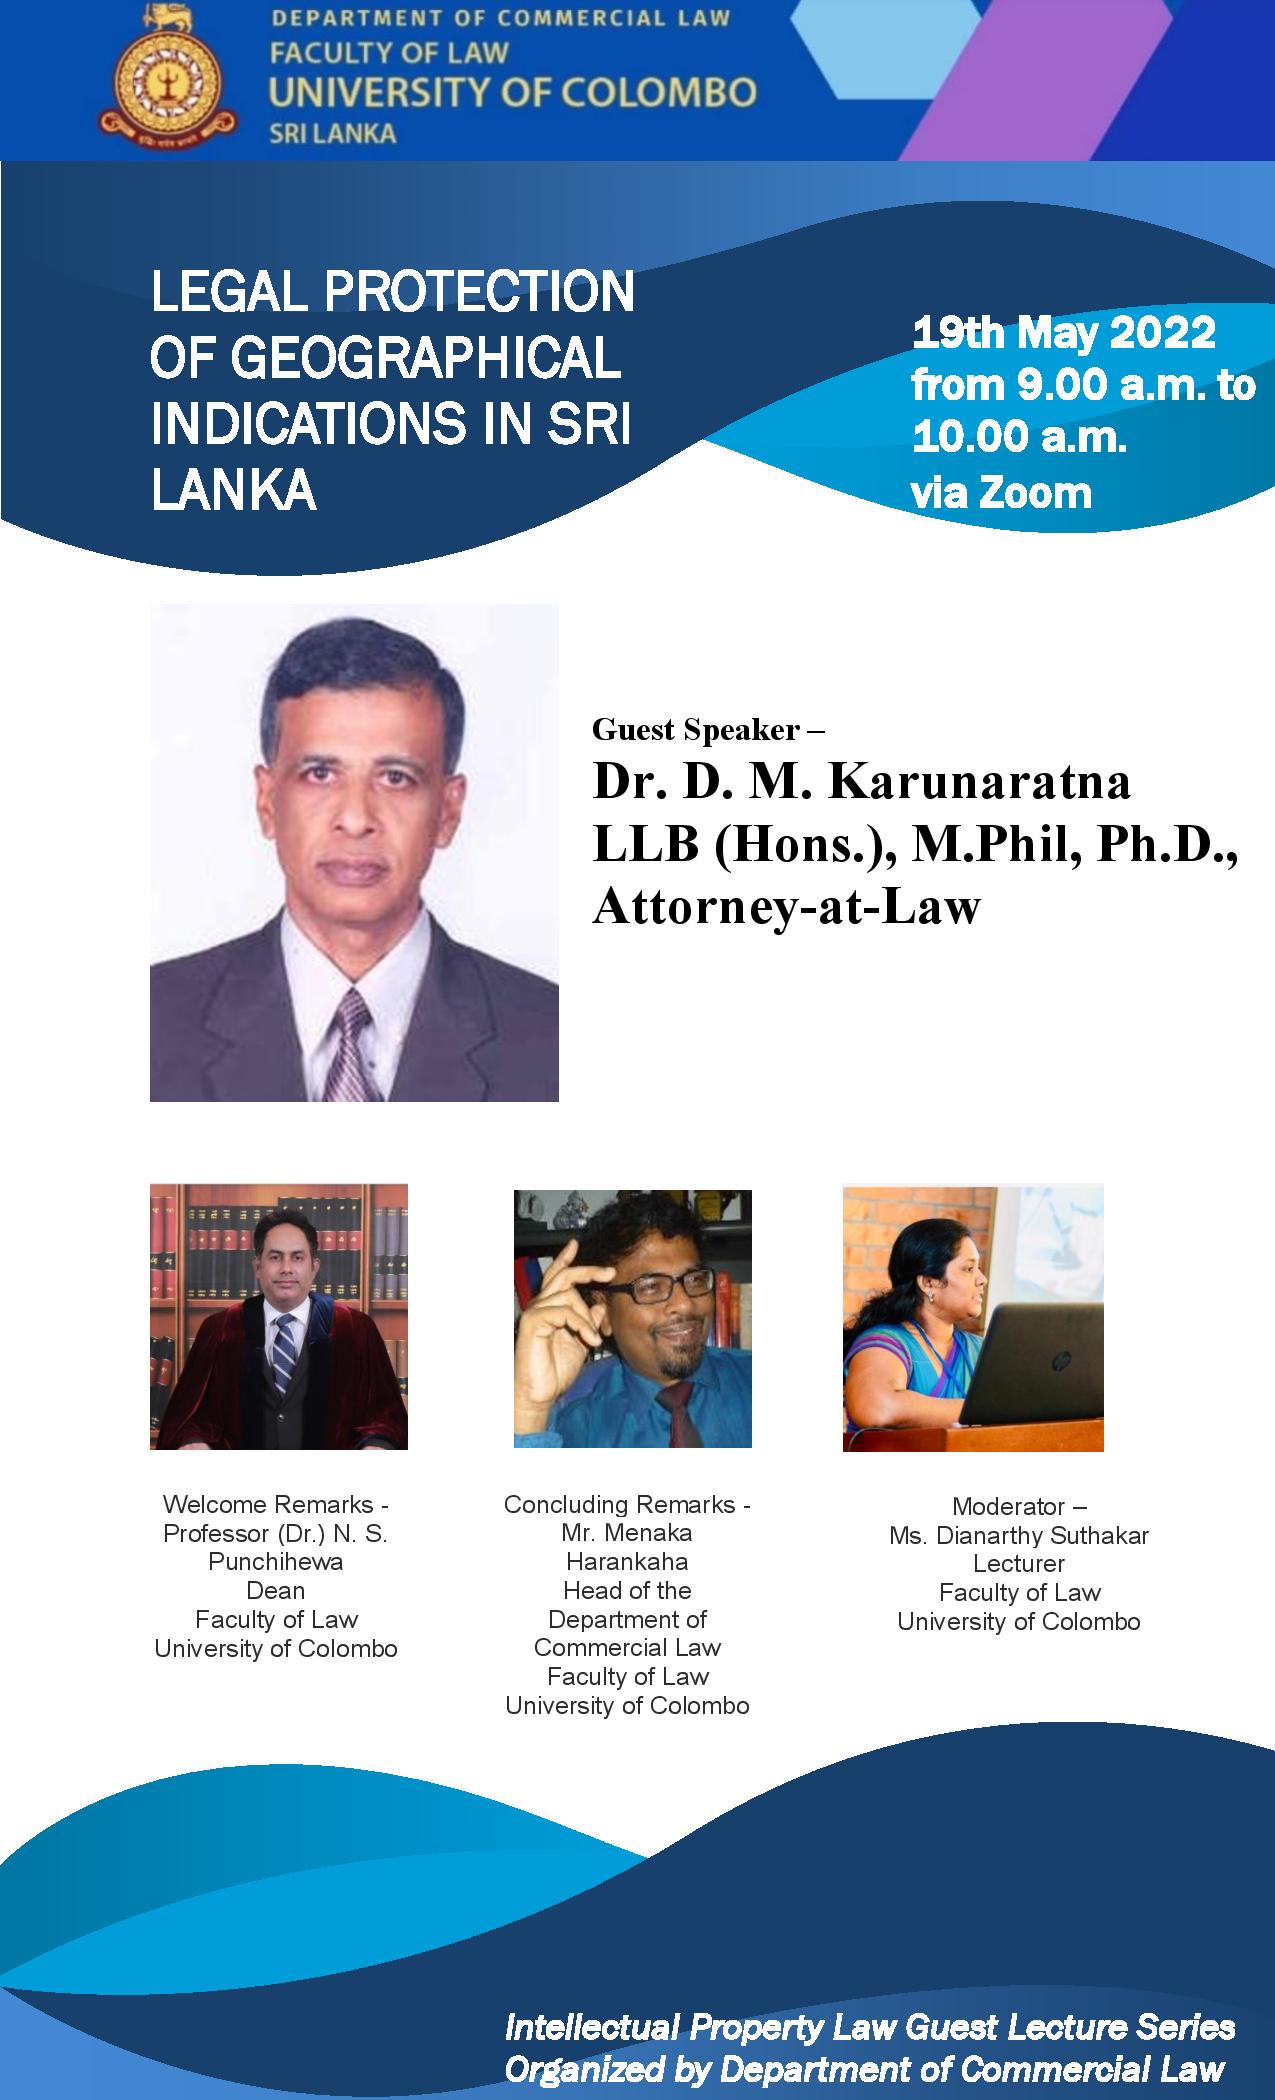 Guest Lecture on Legal Protection of Geographical Indications in Sri Lanka